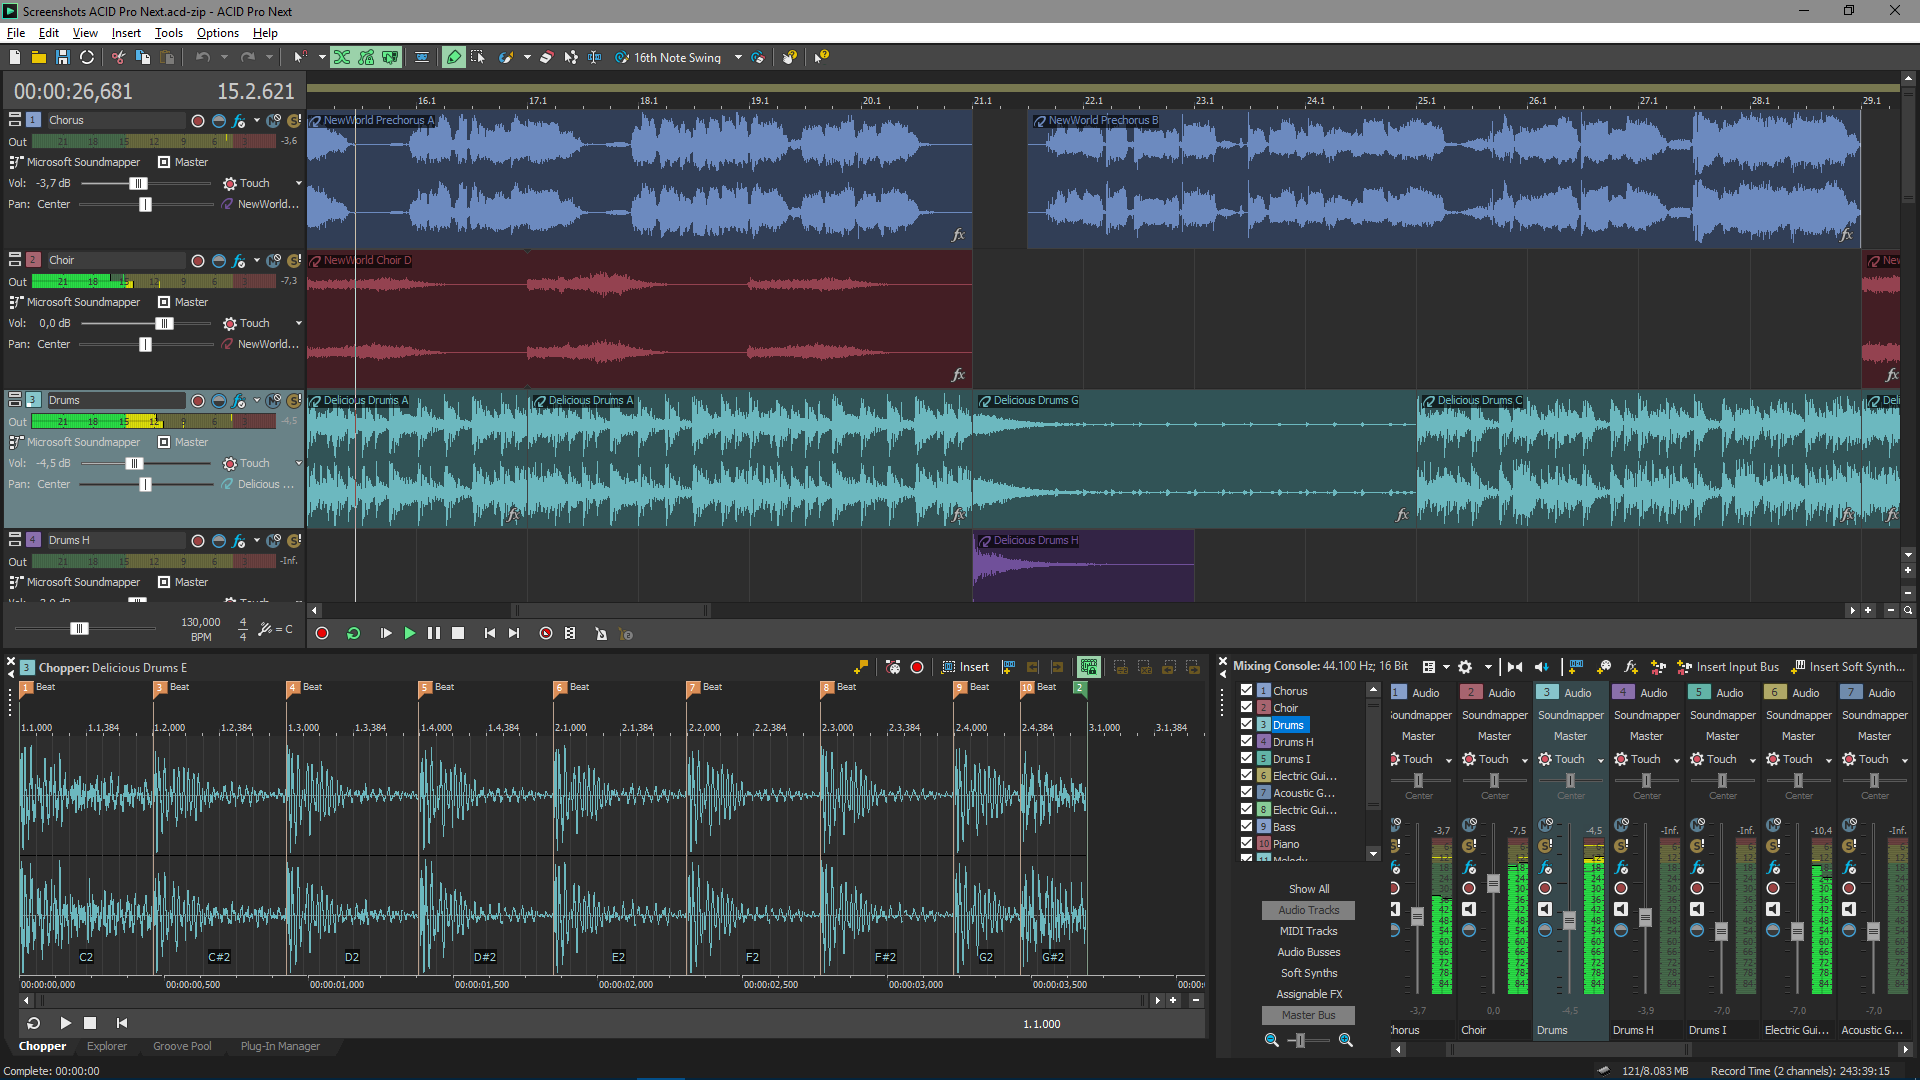 MAGIX releases ACID Pro 9 and ACID Pro Next for Windows